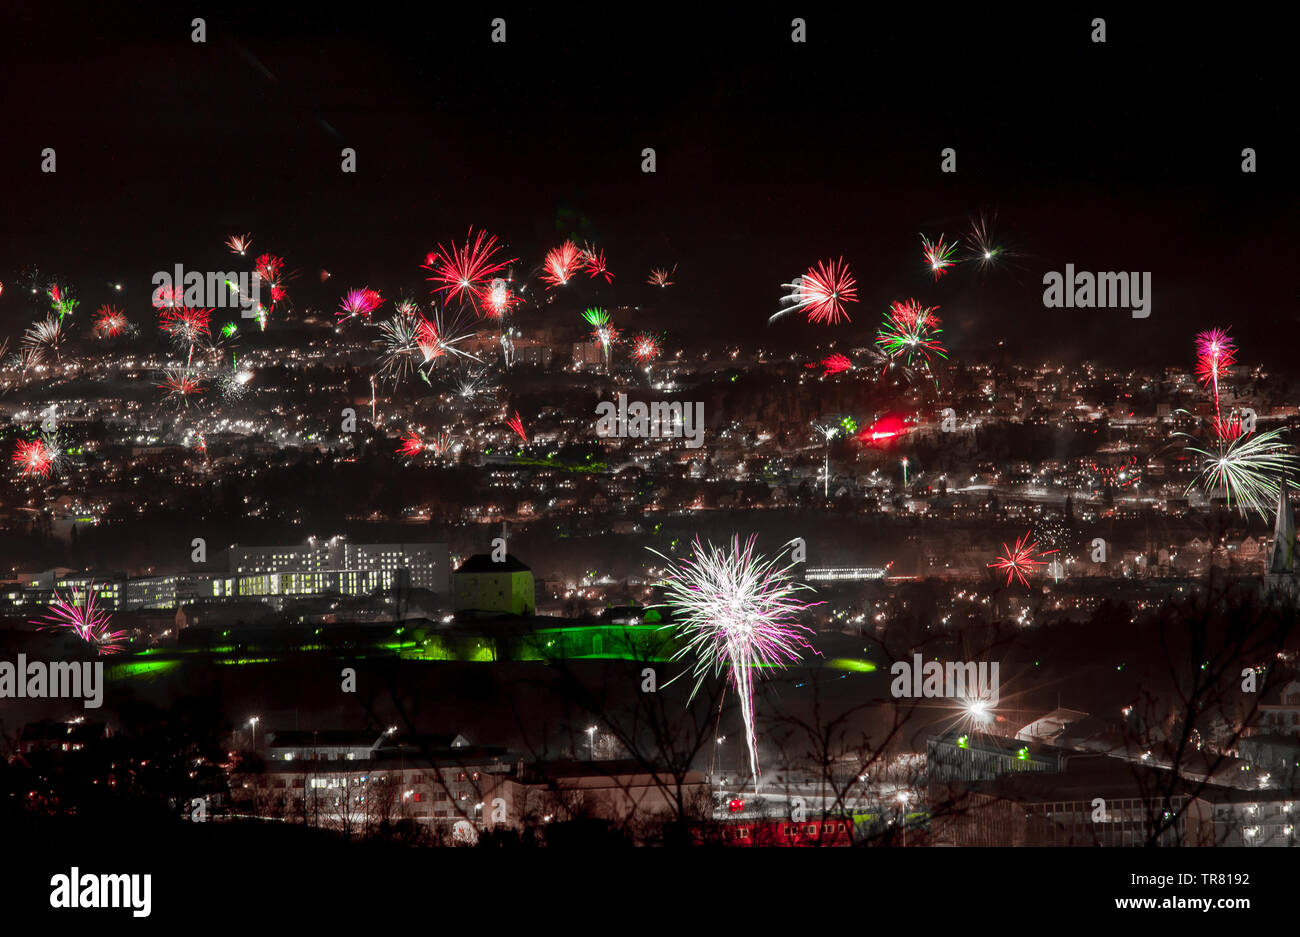 New year's eve fireworks over a dark town. Stock Photo